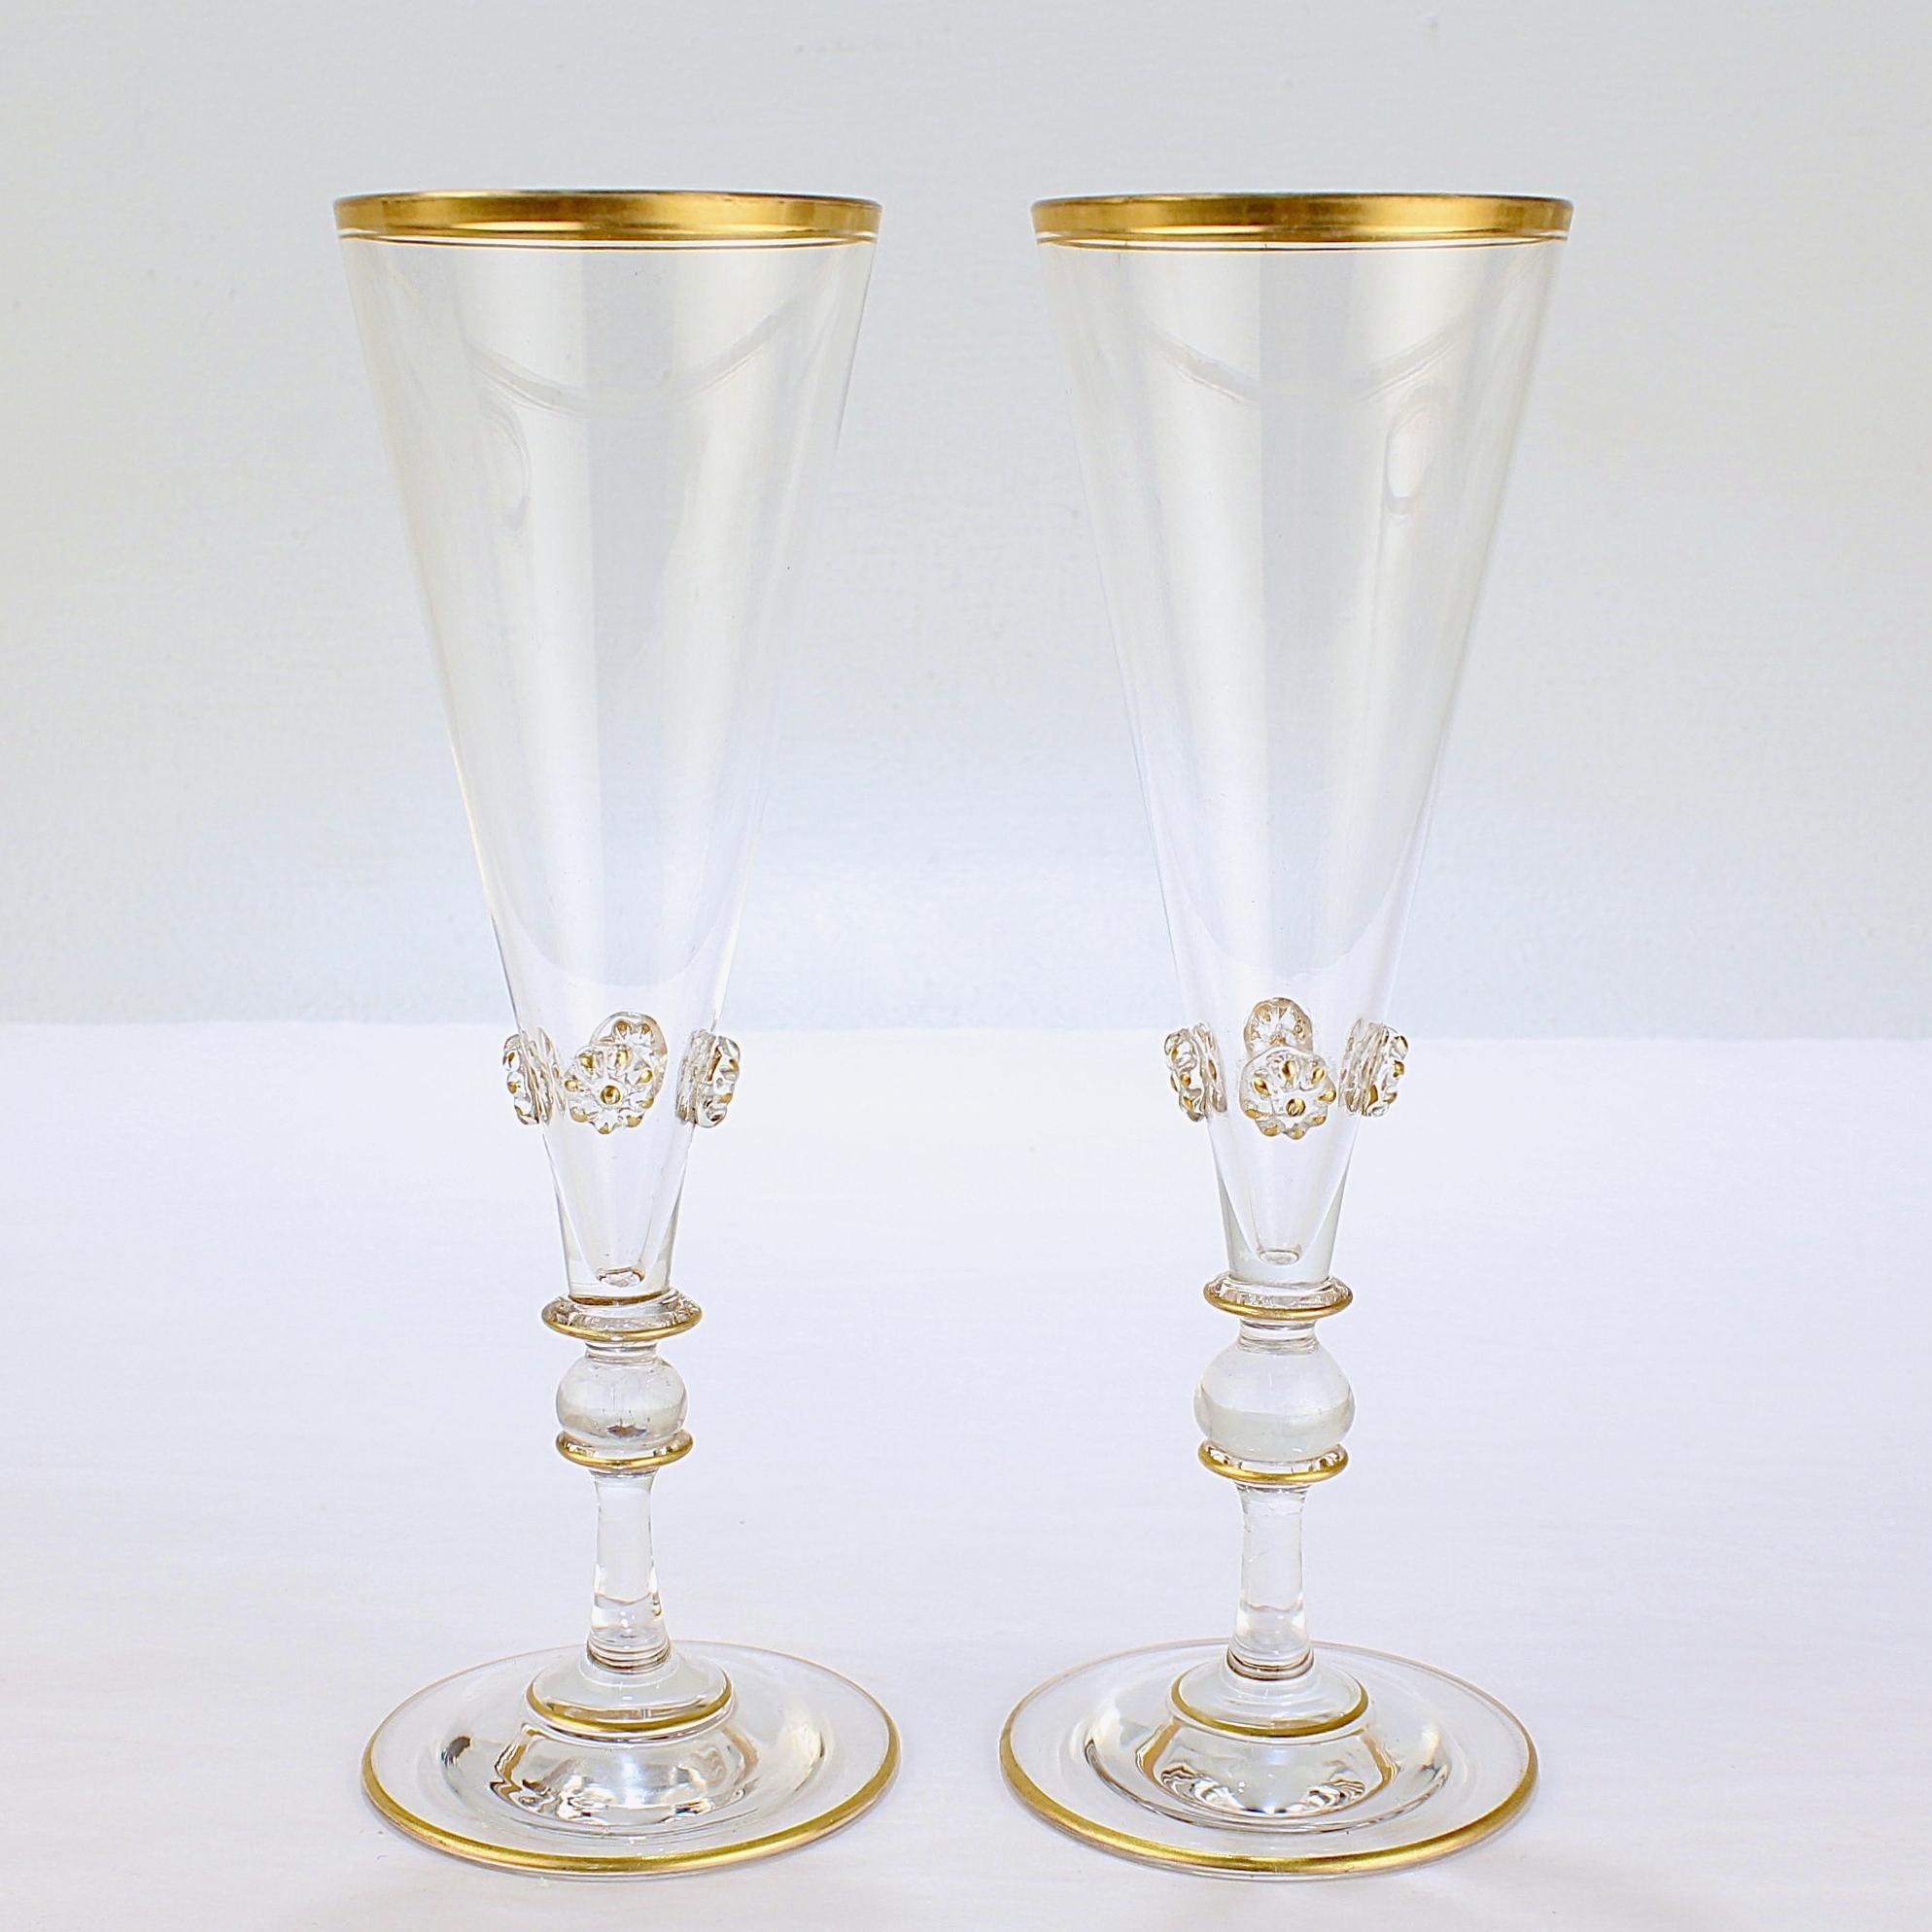 Renaissance Pair of Old or Antique Bohemian Glass Champagne Flutes with Applied Knops